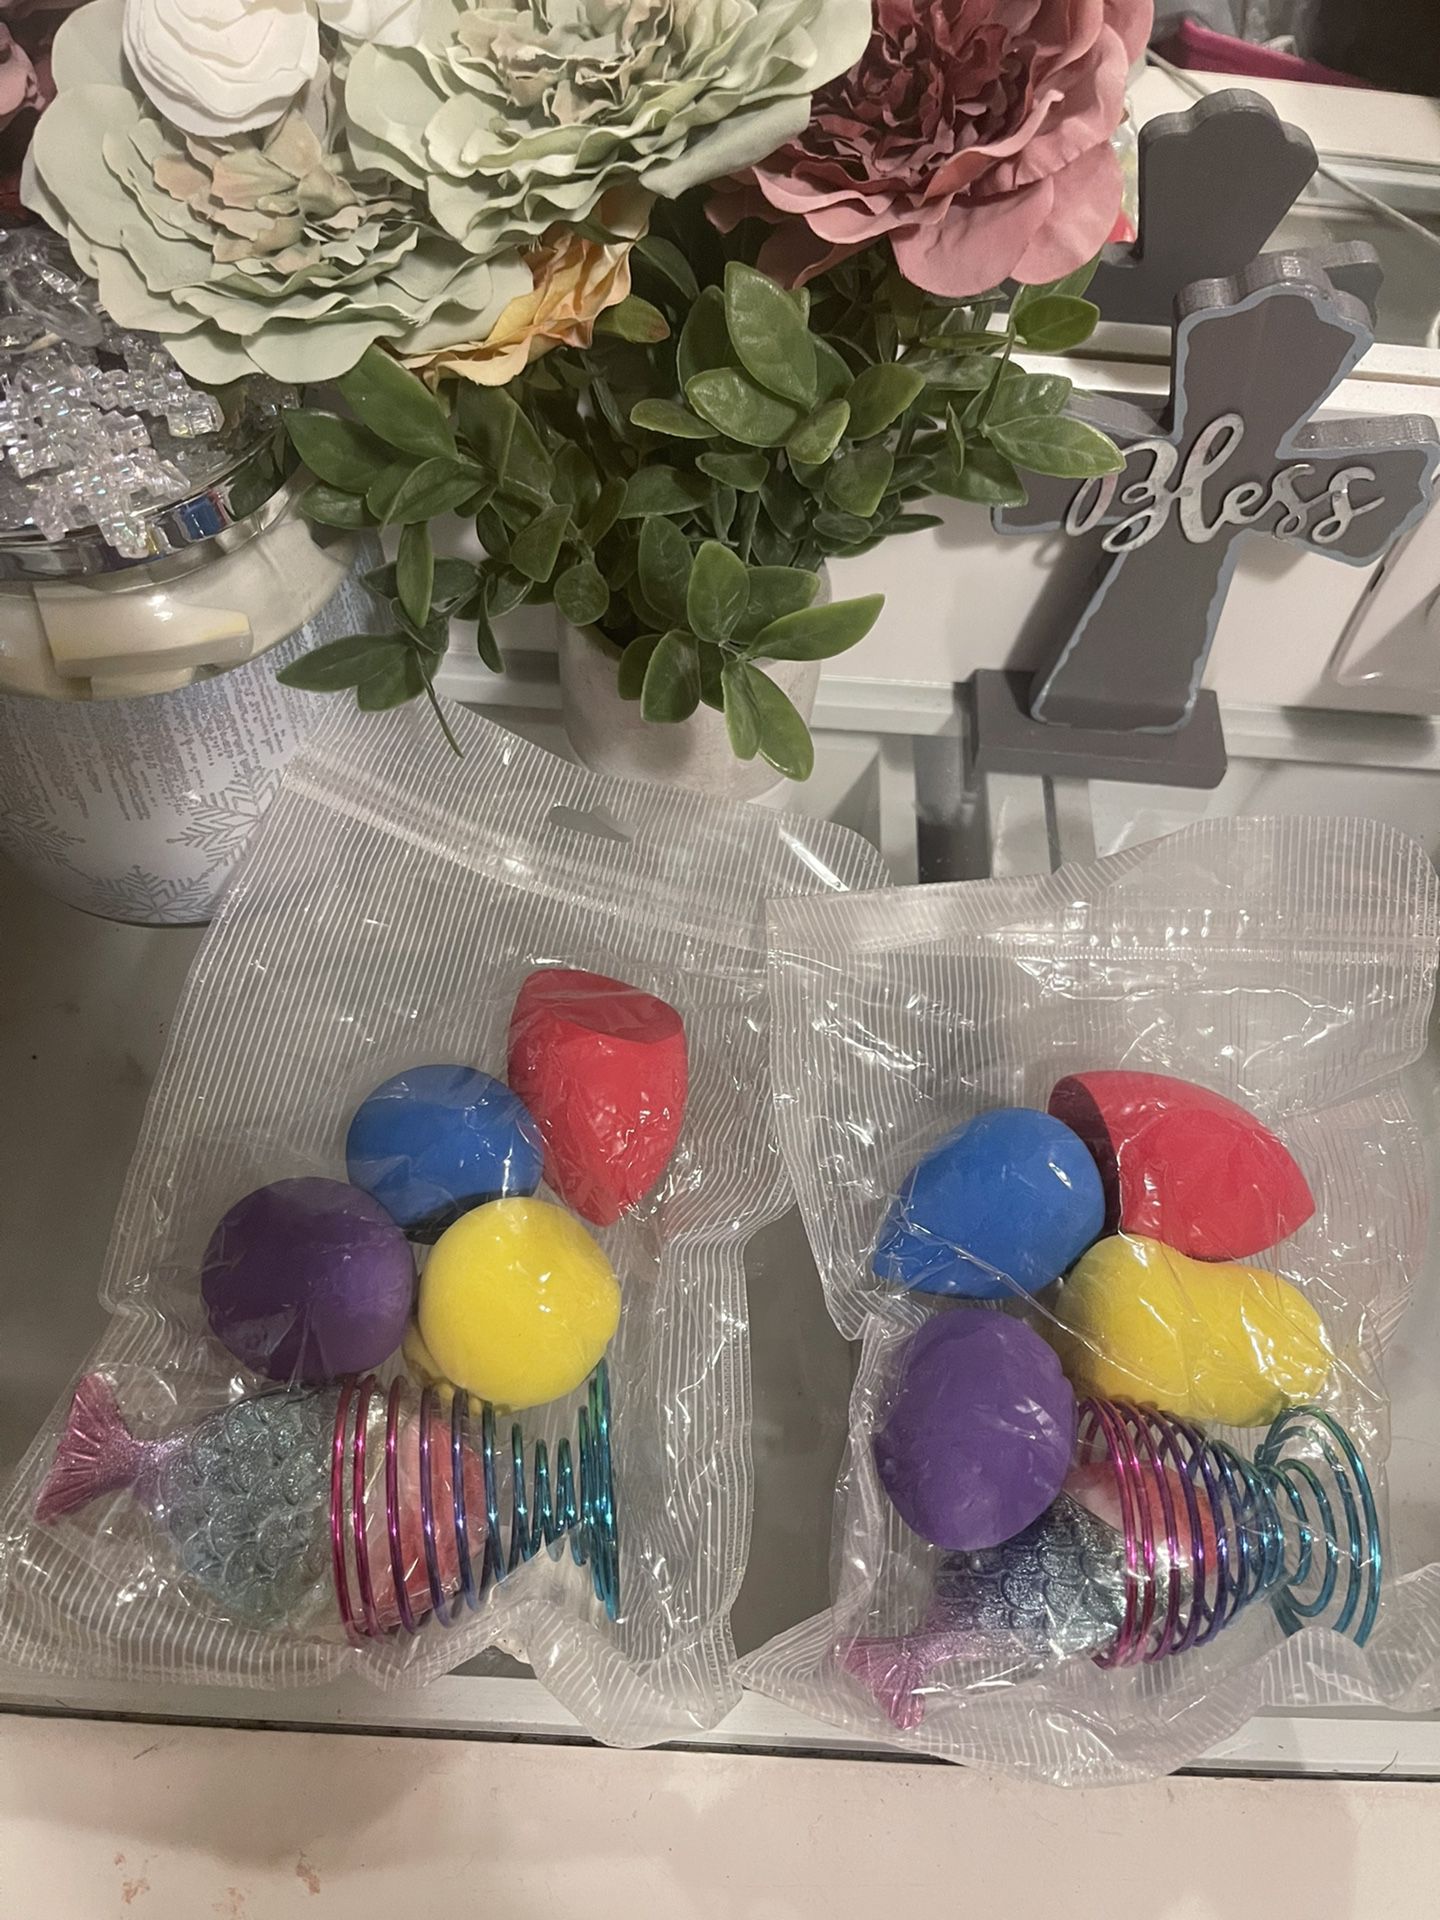 Beauty Blenders Each Bag Is $10 Firm Price 2 Available Only 